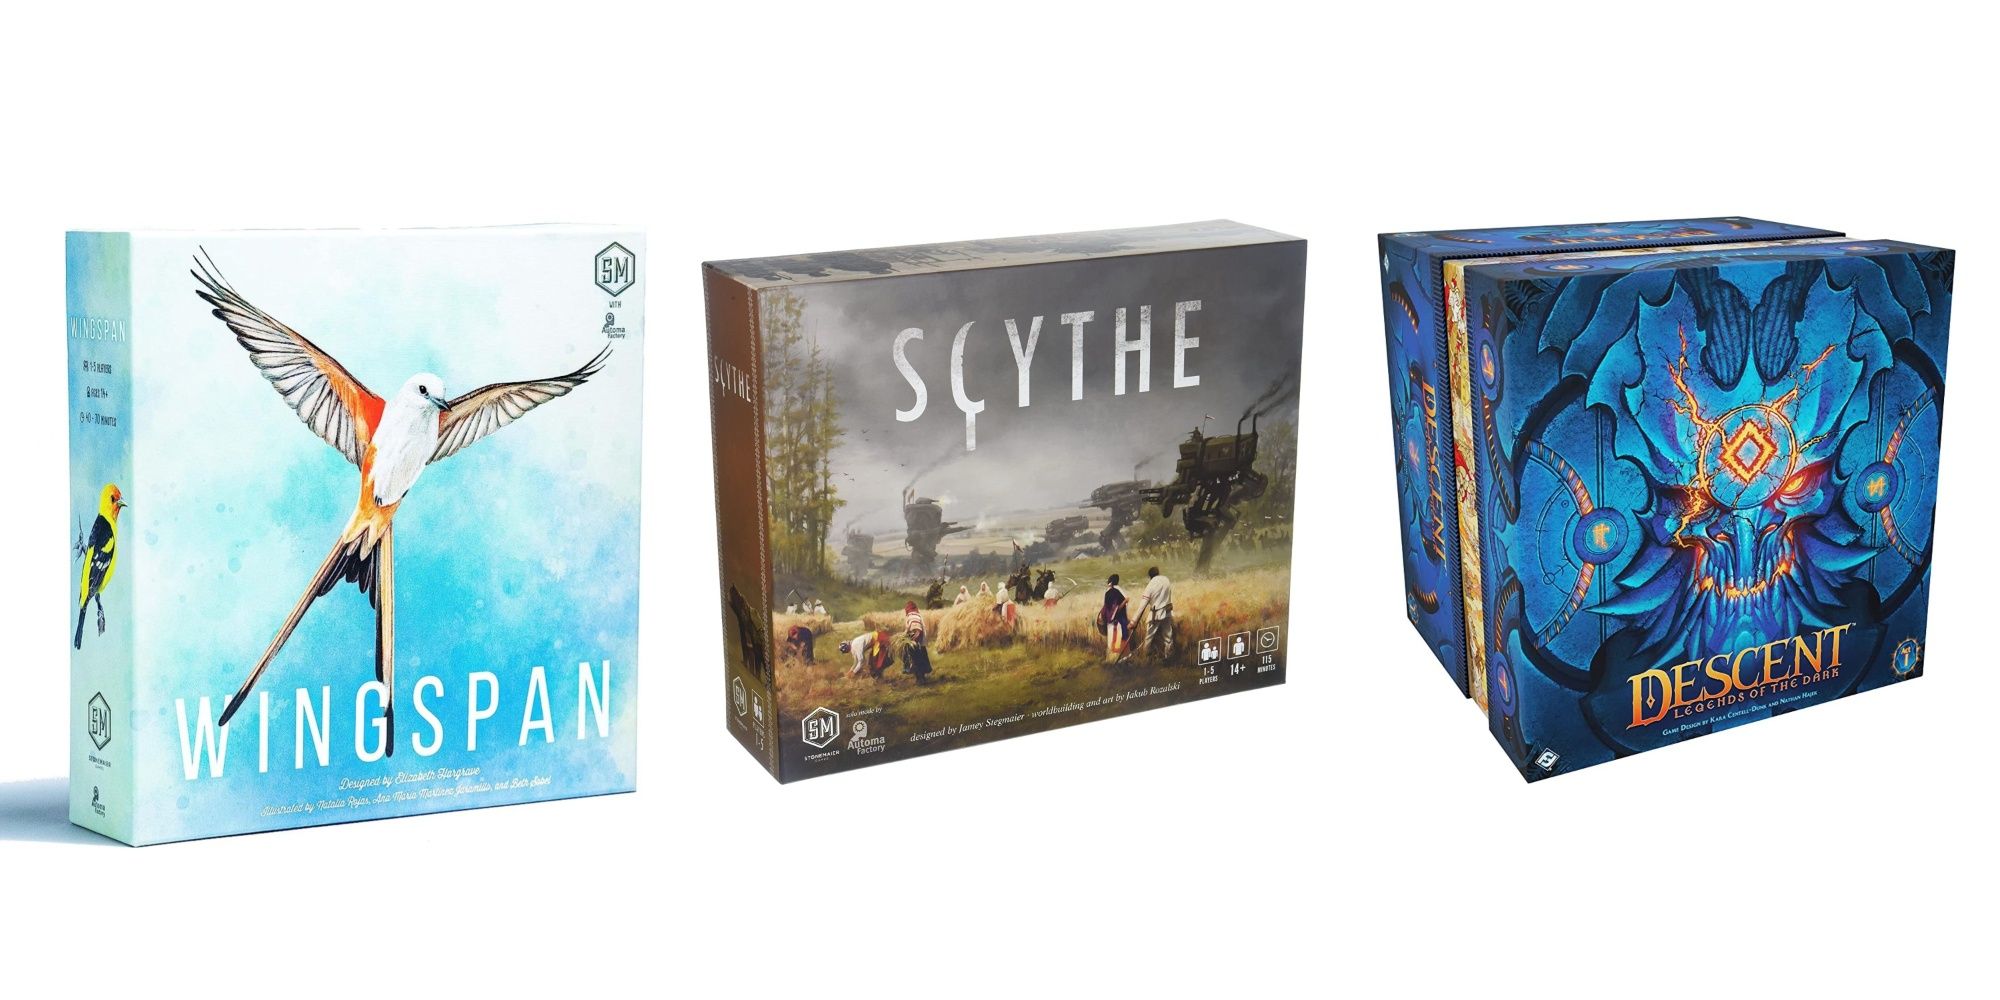 Two Playe board games featuring Wingspan, Scythe, and Descent: Legends Of The Dark